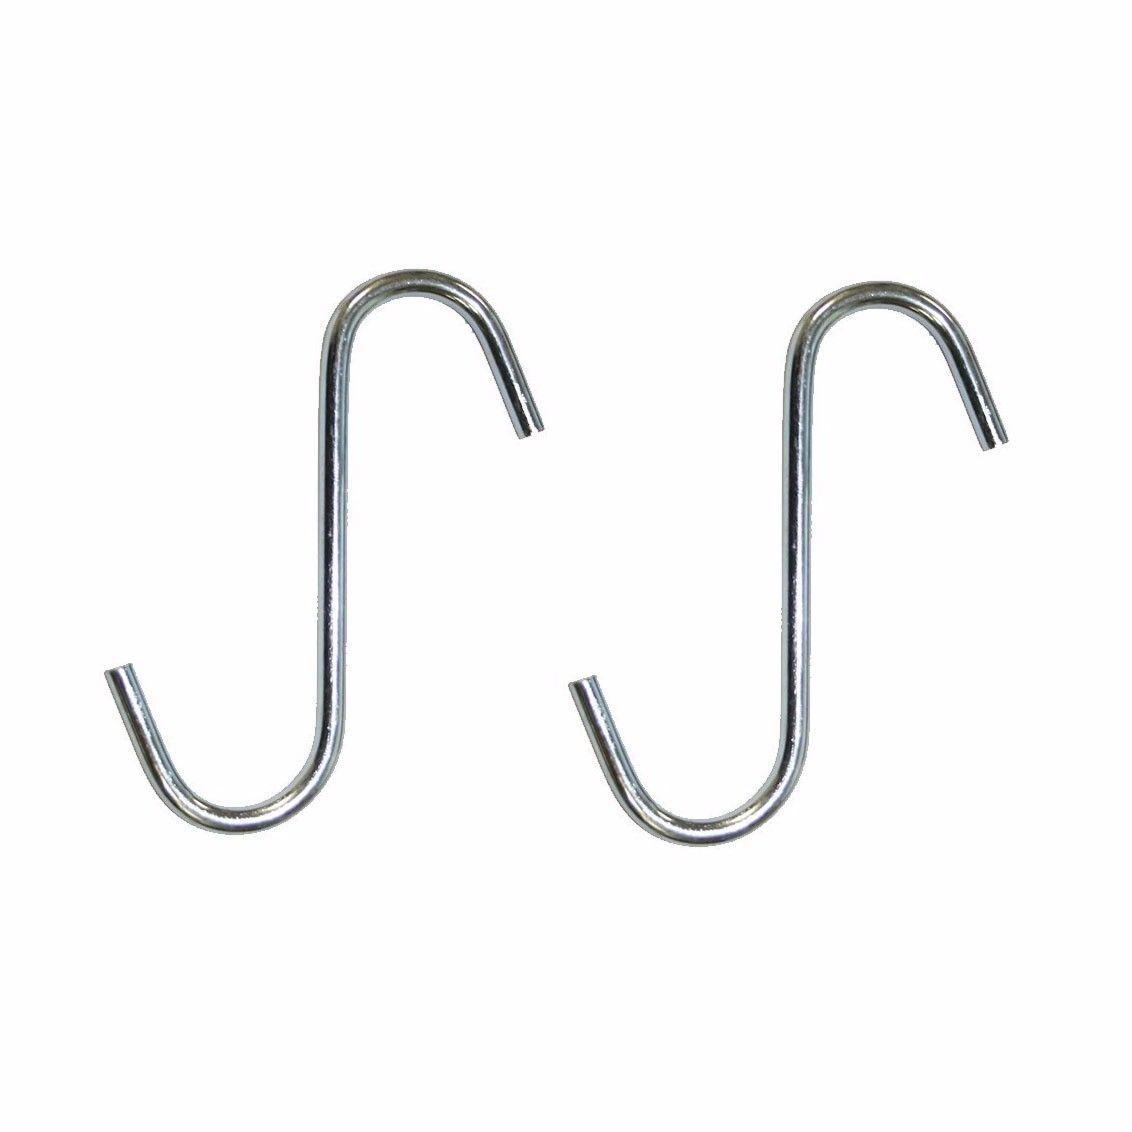 Value Pack 'S' Hooks 100mm Zinc Plated Pack Of 2 Kitchen 0976